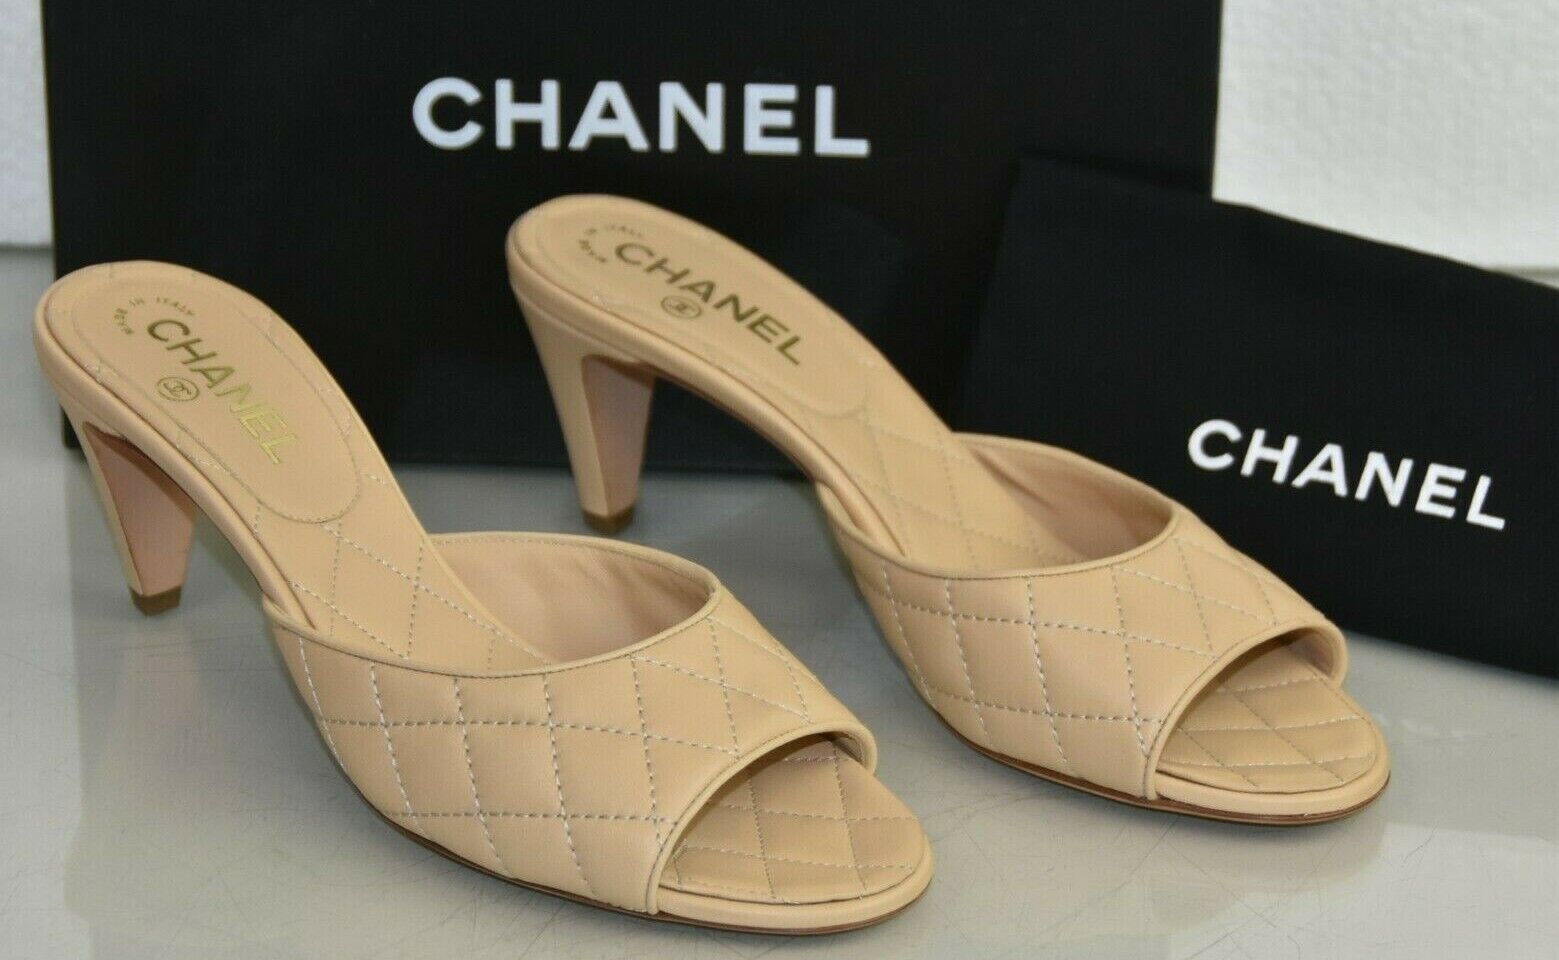 NEW Chanel Slides Mules Sandals Cream CC Gold Quilted Leather